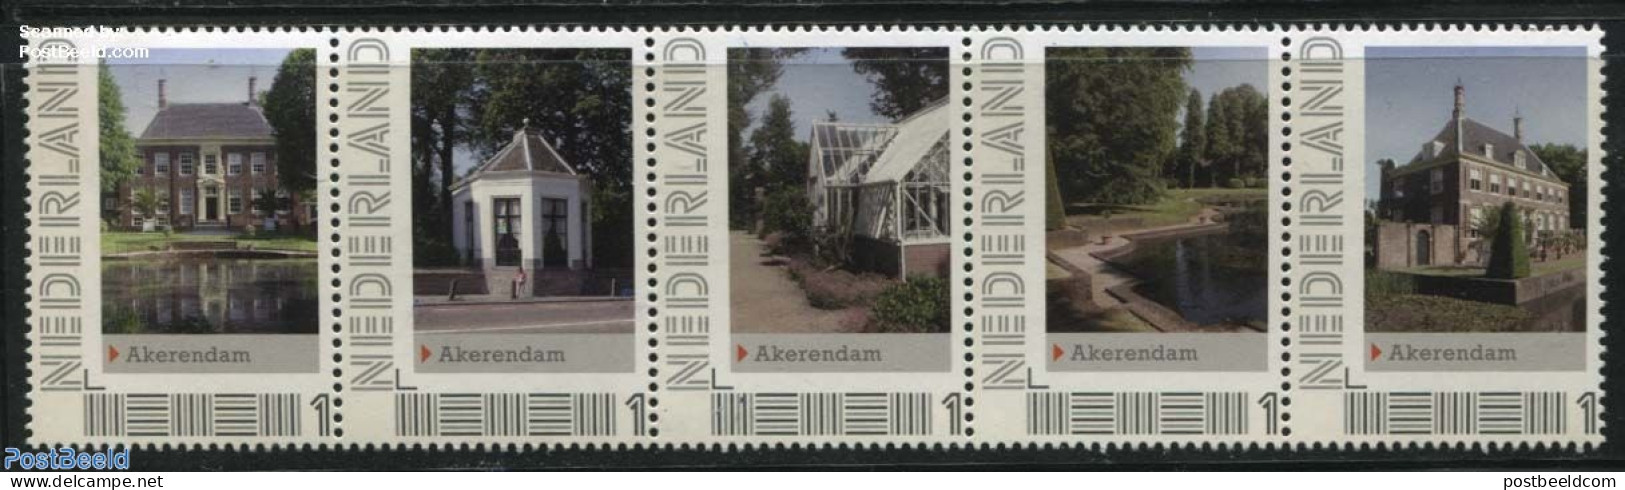 Netherlands - Personal Stamps TNT/PNL 2012 Akerendam 4V [::::], Mint NH, Nature - Trees & Forests - Castles & Fortific.. - Rotary, Lions Club